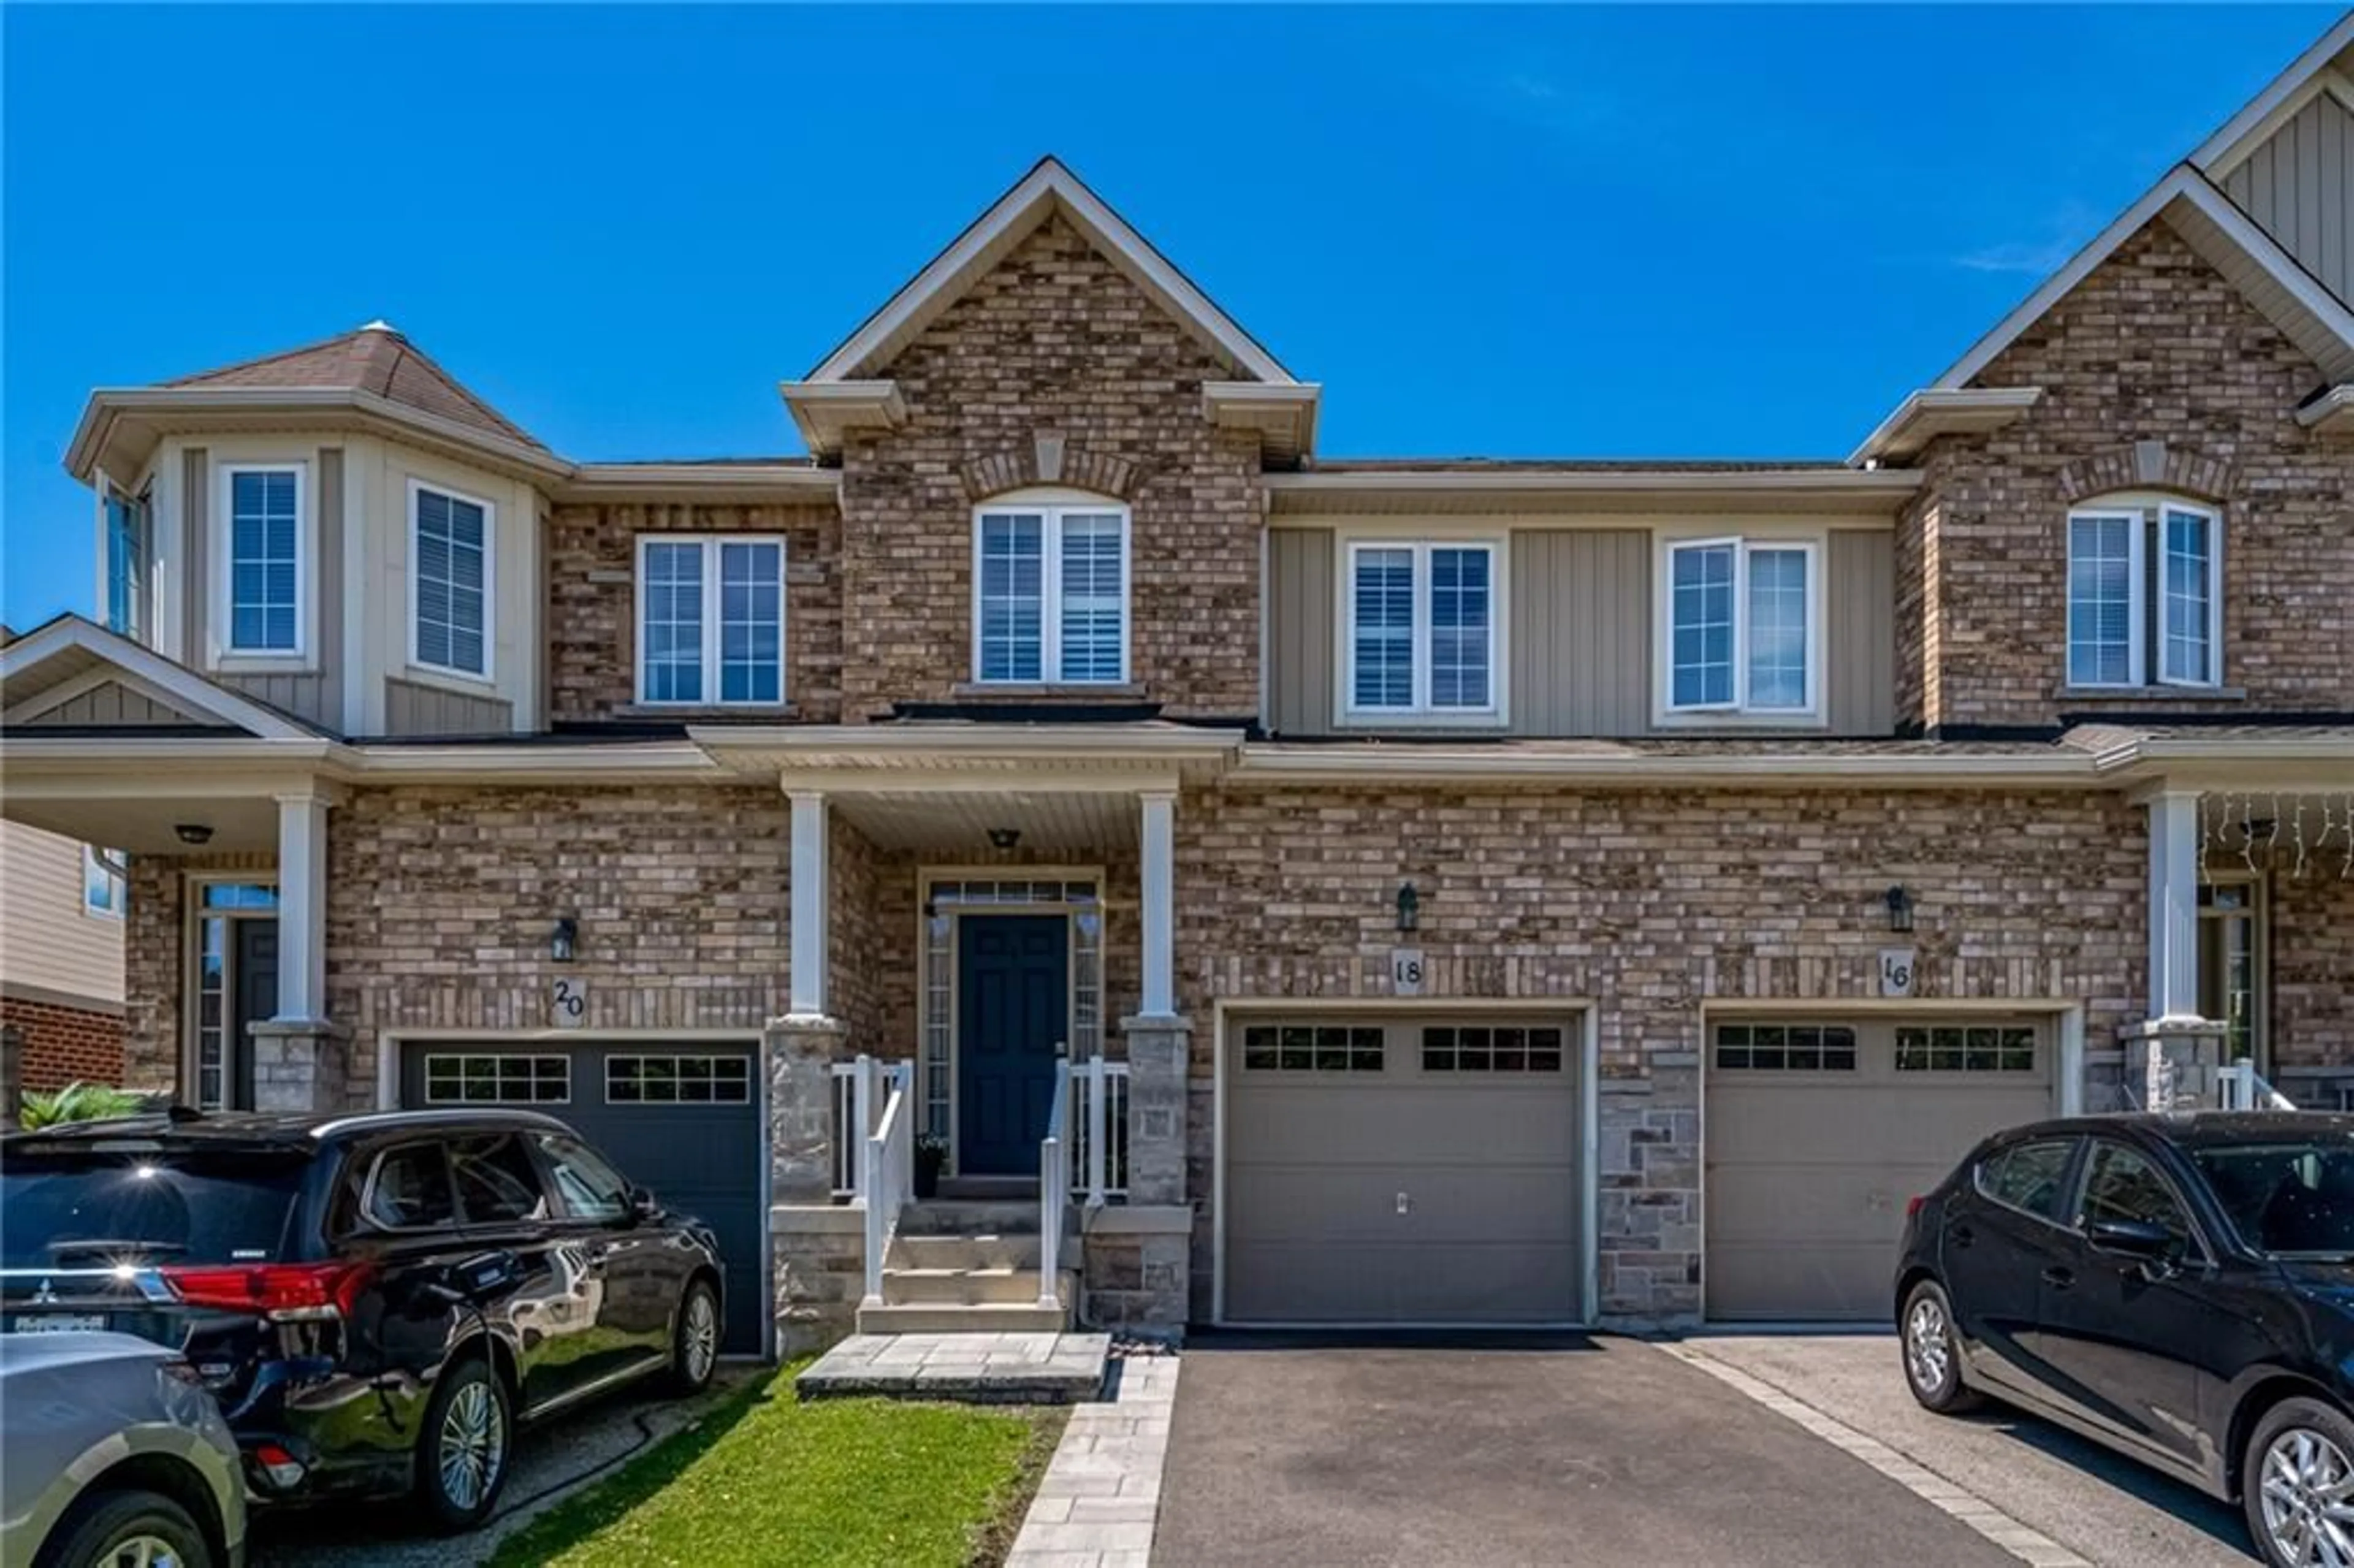 Home with brick exterior material for 18 Browview Dr, Waterdown Ontario L0R 2H9